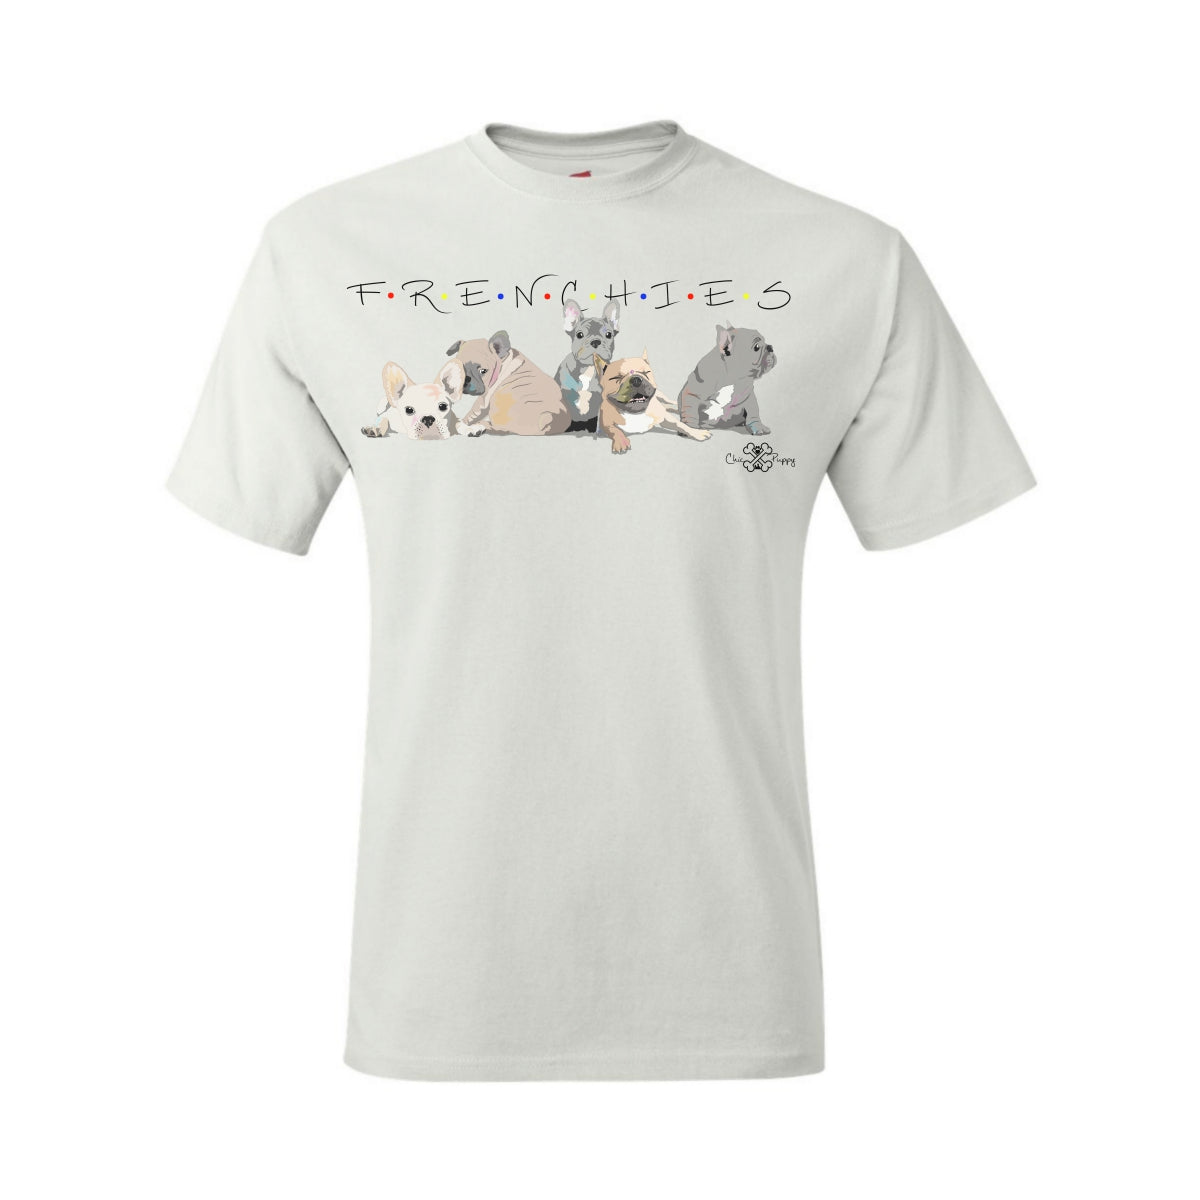 Matching Dog and Owner - F.R.E.N.C.H.I.E.S. Sitcom - Youth Shirts - Youth